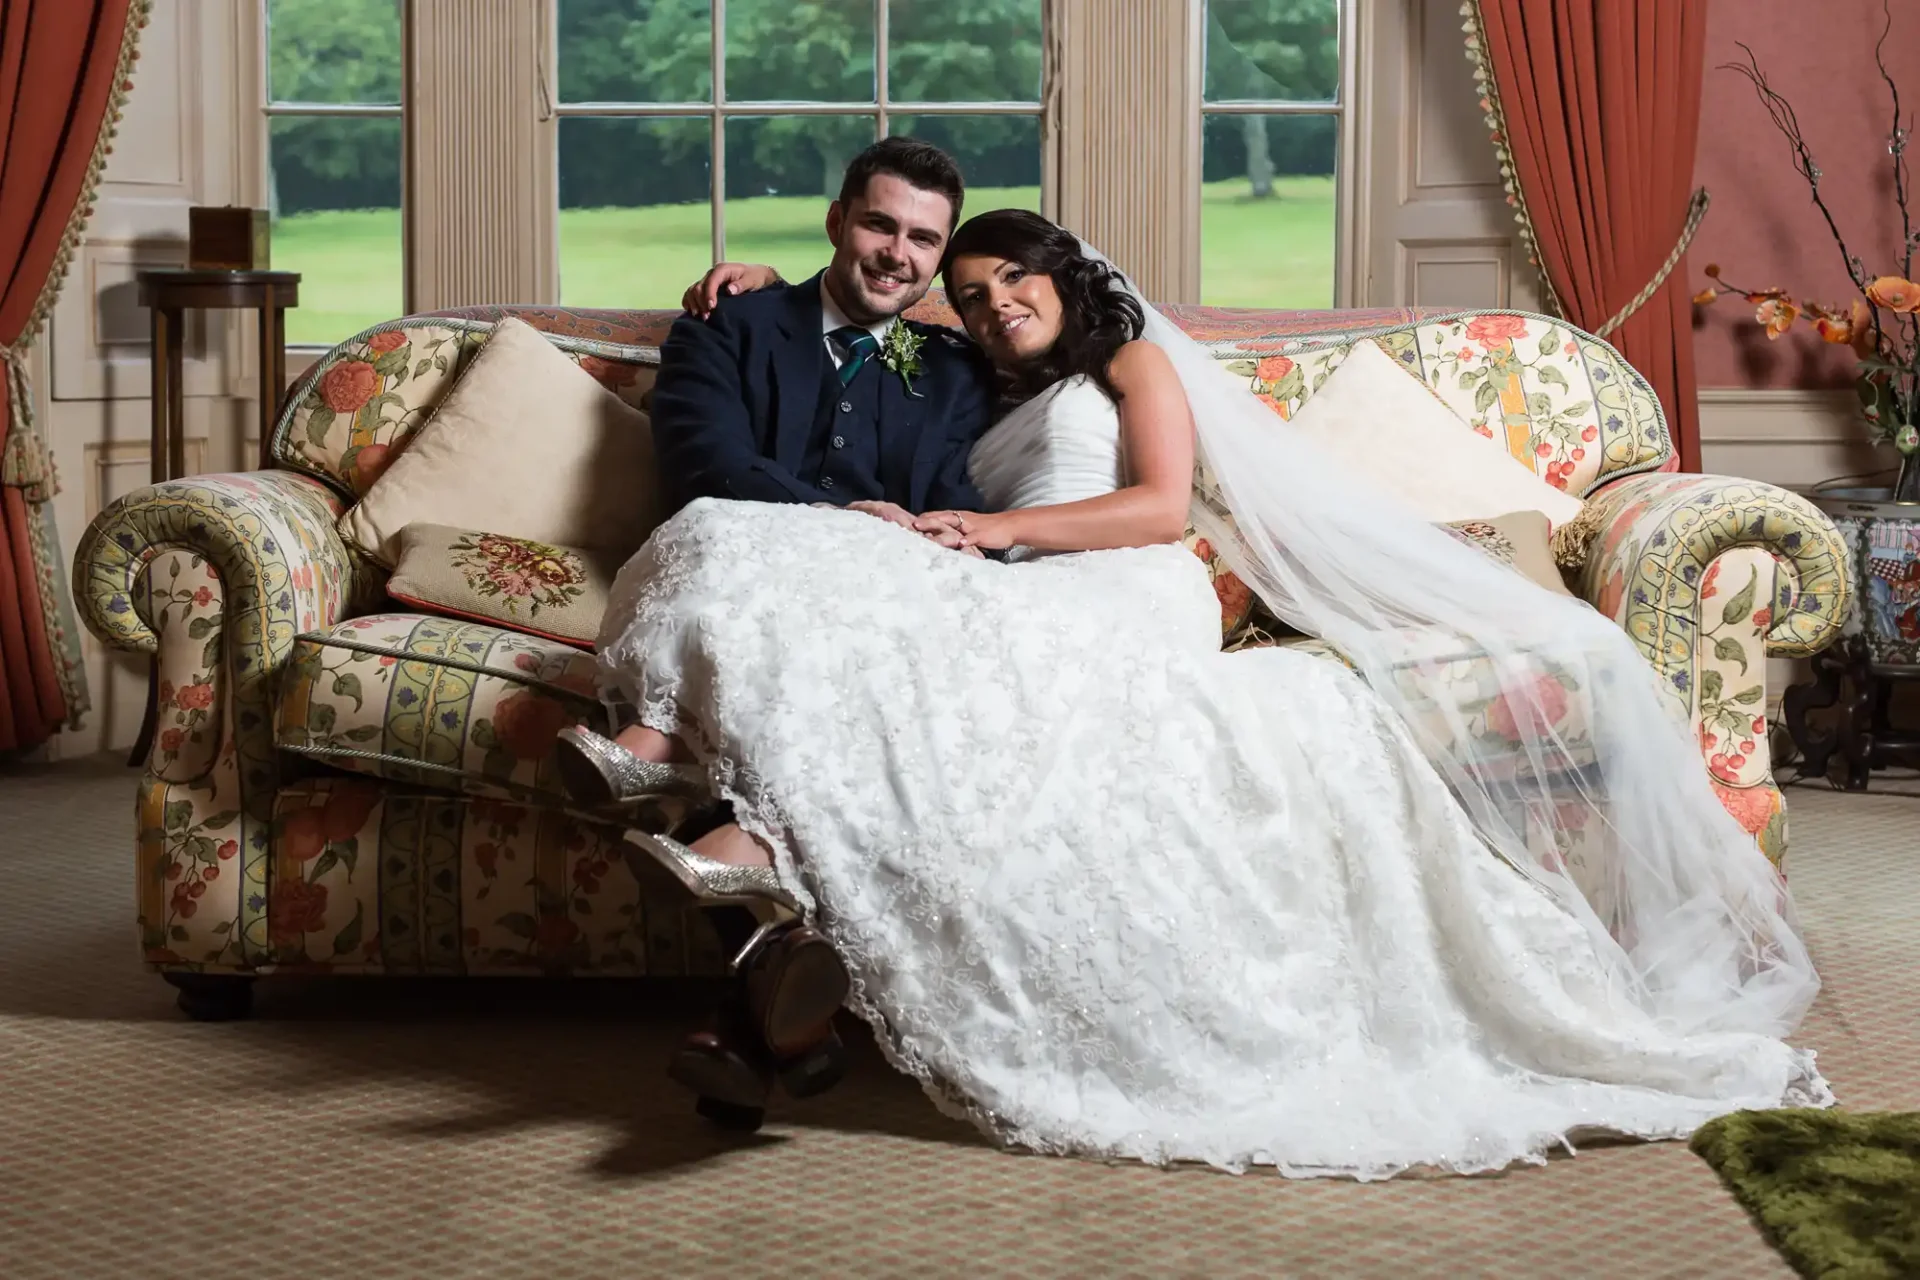 A newlywed couple smiling, seated on a floral sofa in an elegant room, the bride in a white lace gown and the groom in a dark suit with a green boutonniere.